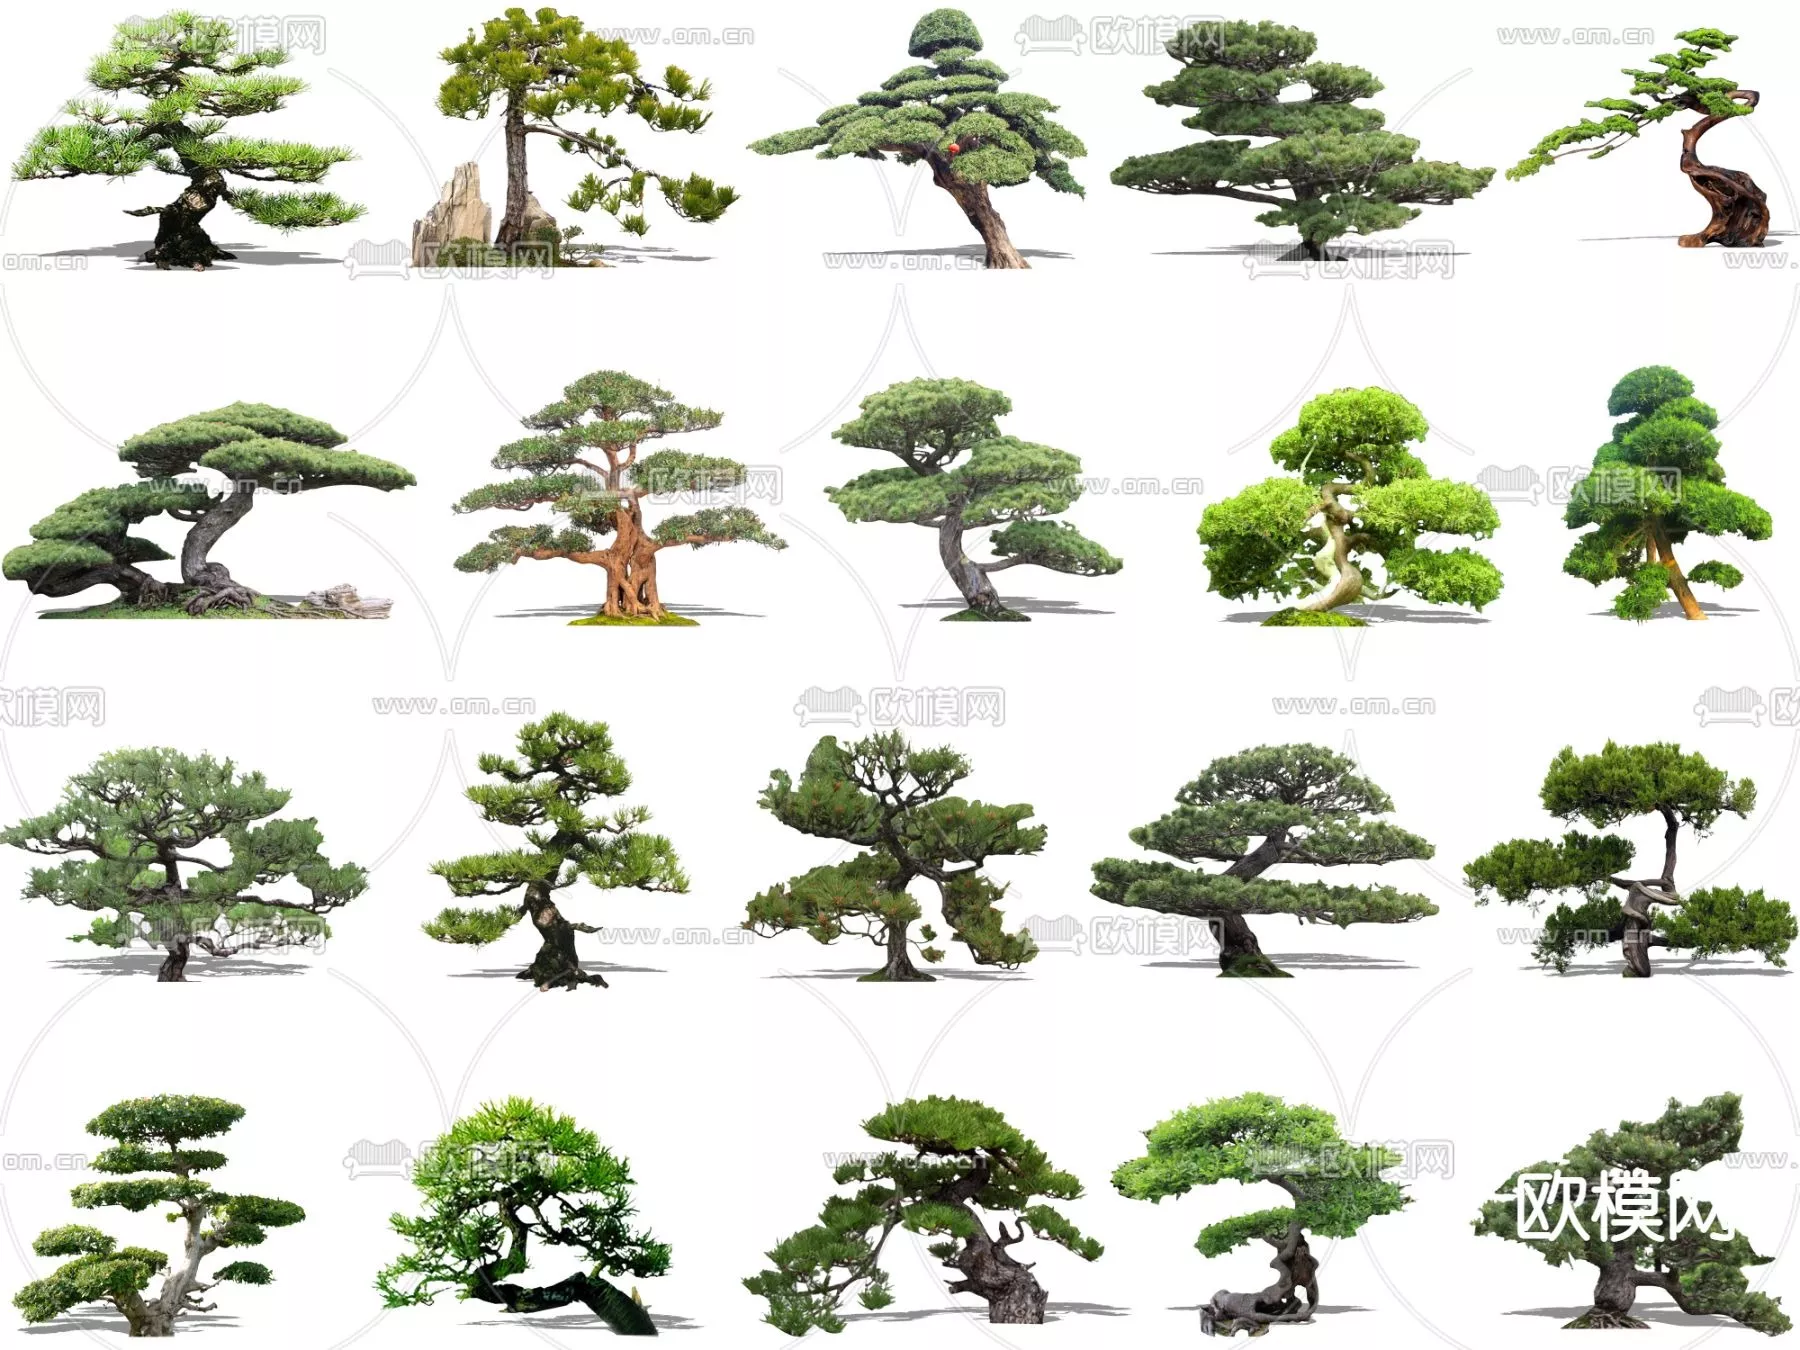 MODERN TREE - SKETCHUP 3D MODEL - VRAY OR ENSCAPE - ID15366